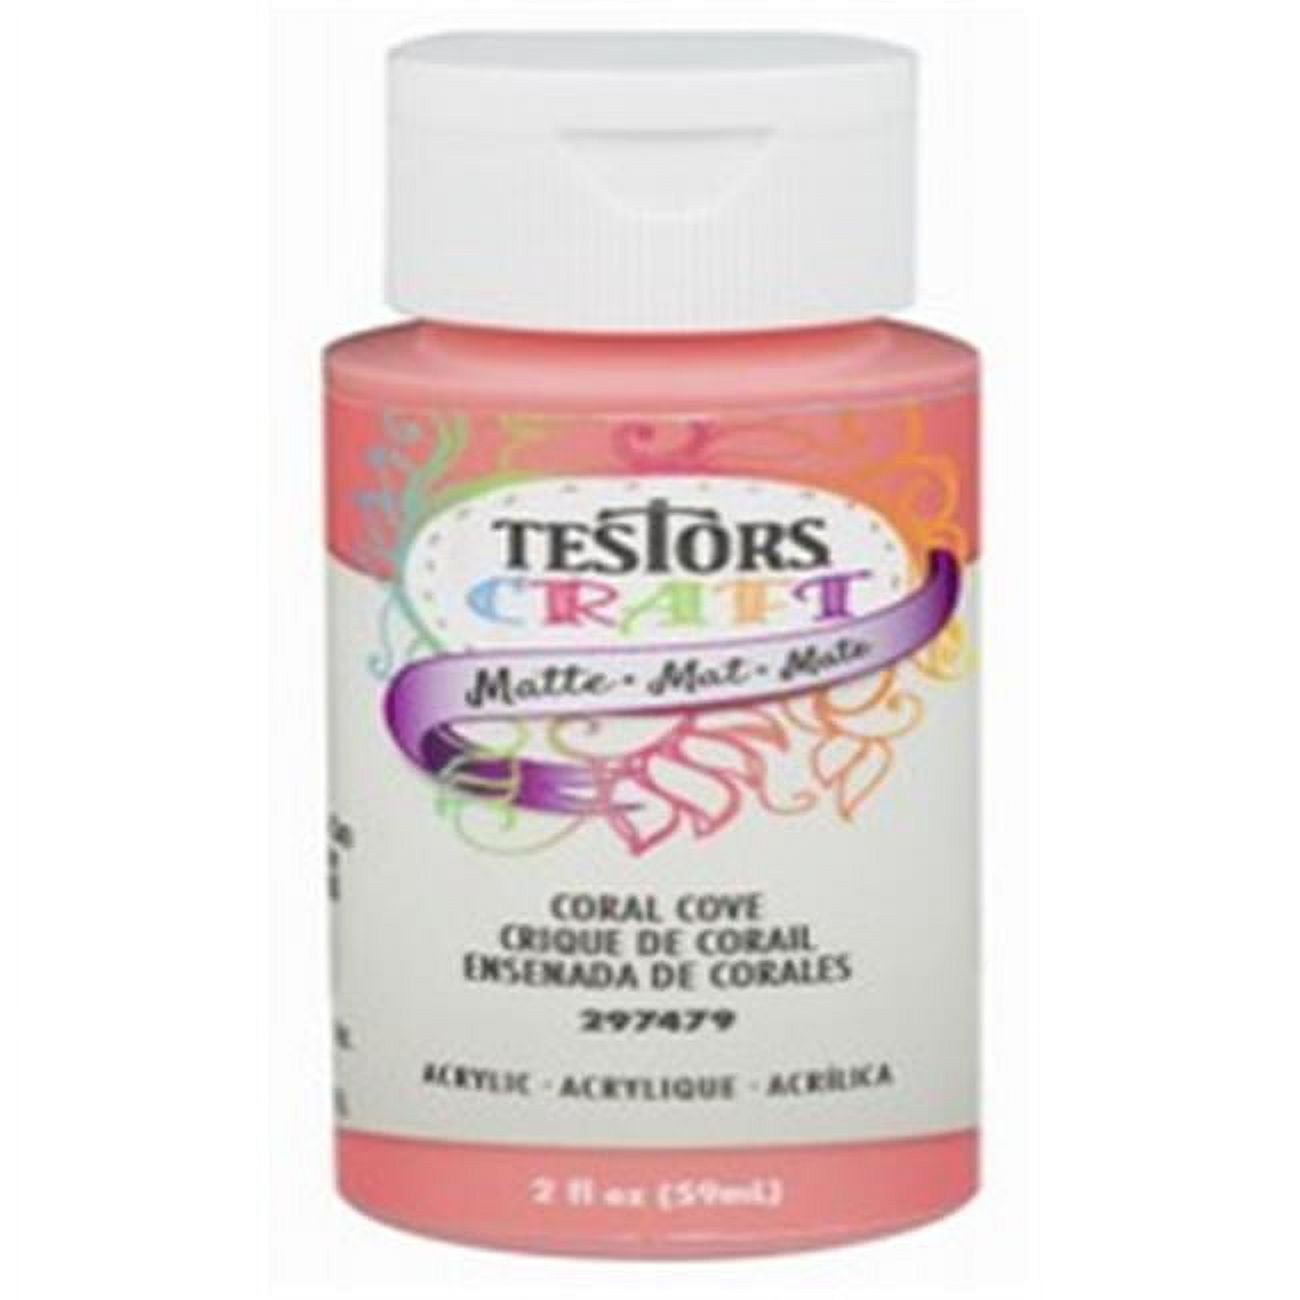 Testors Craft Matte Orange Acrylic Paint in the Craft Paint department at